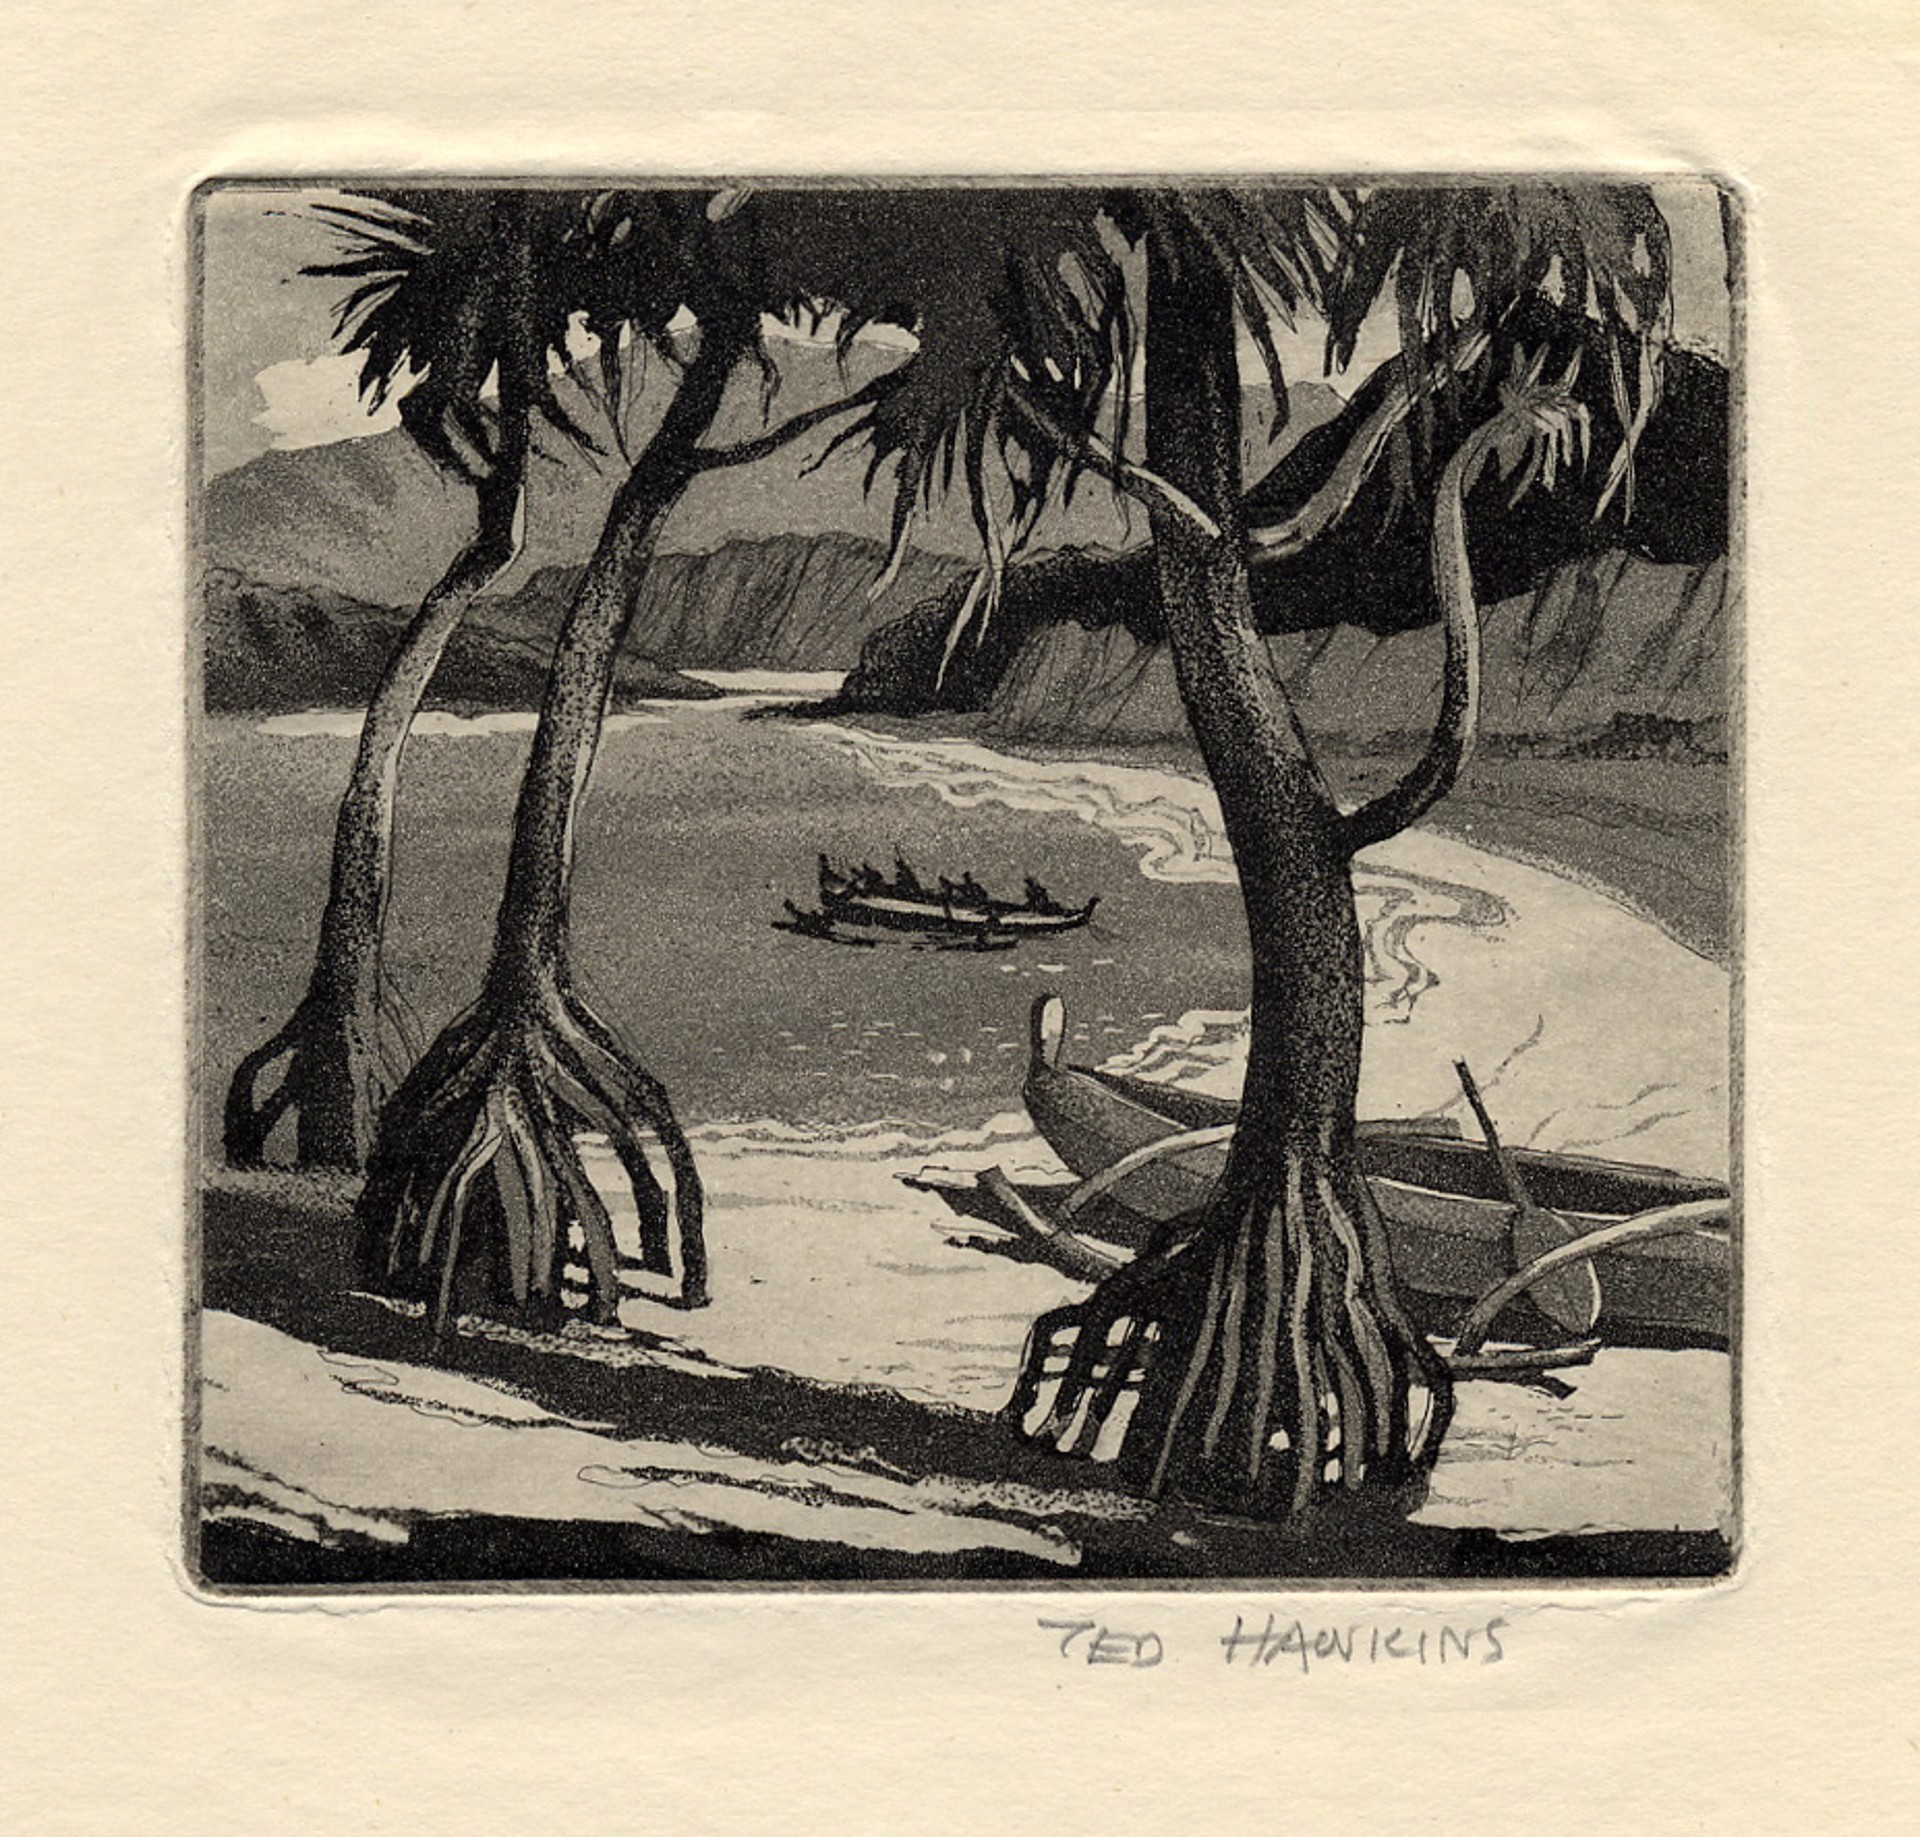 Untitled (Lauhala and Canoes) by Ted (Theodore William) Hawkins